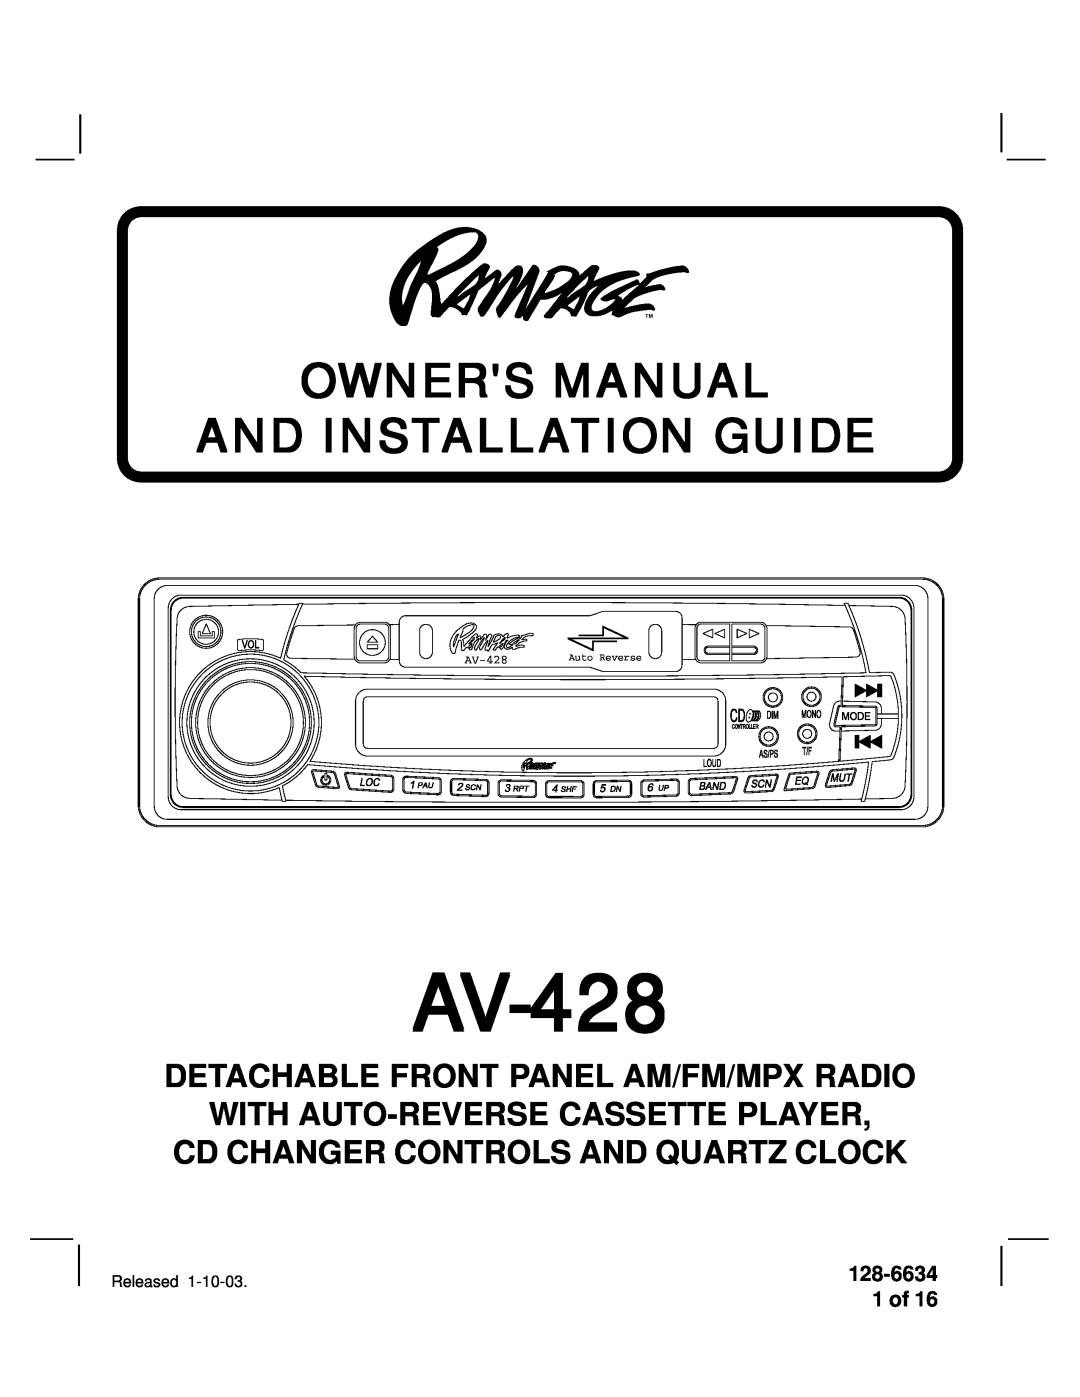 Audiovox AV-428V manual 128-6634 1 of, Detachable Front Panel Am/Fm/Mpx Radio, With Auto-Reverse Cassette Player 